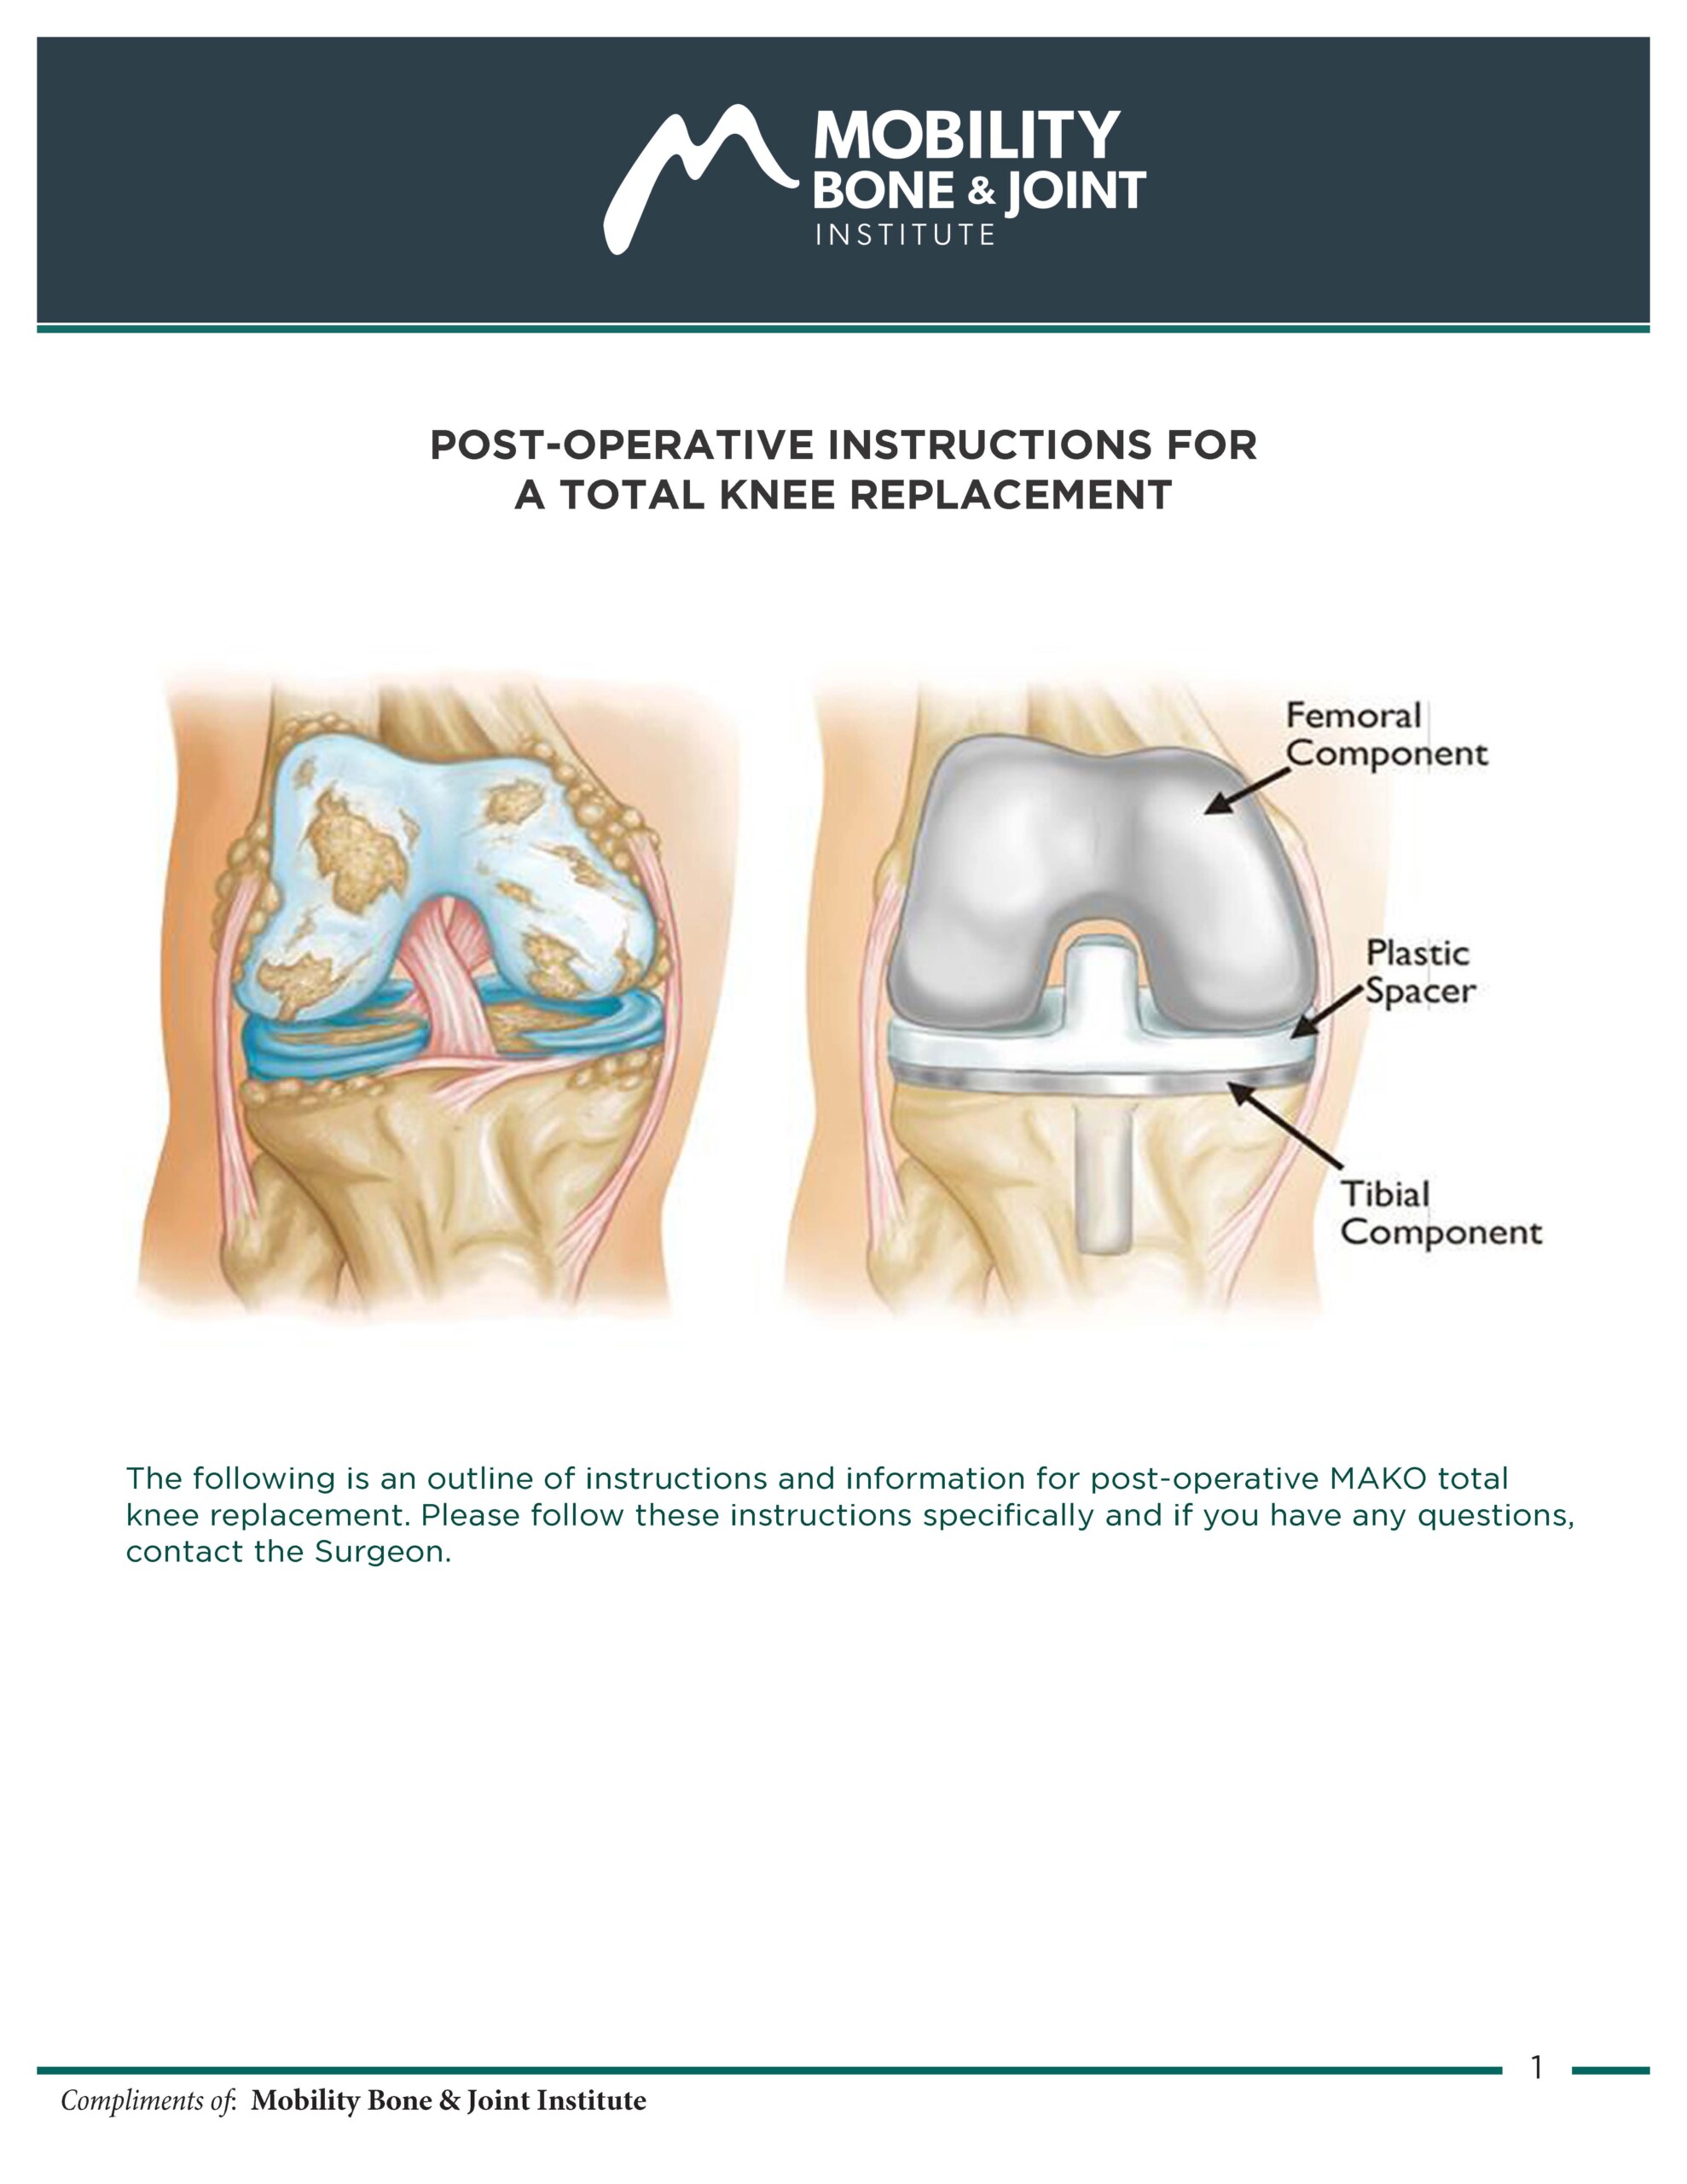 POST-OPERATIVE INSTRUCTIONS FOR A TOTAL KNEE REPLACEMENT